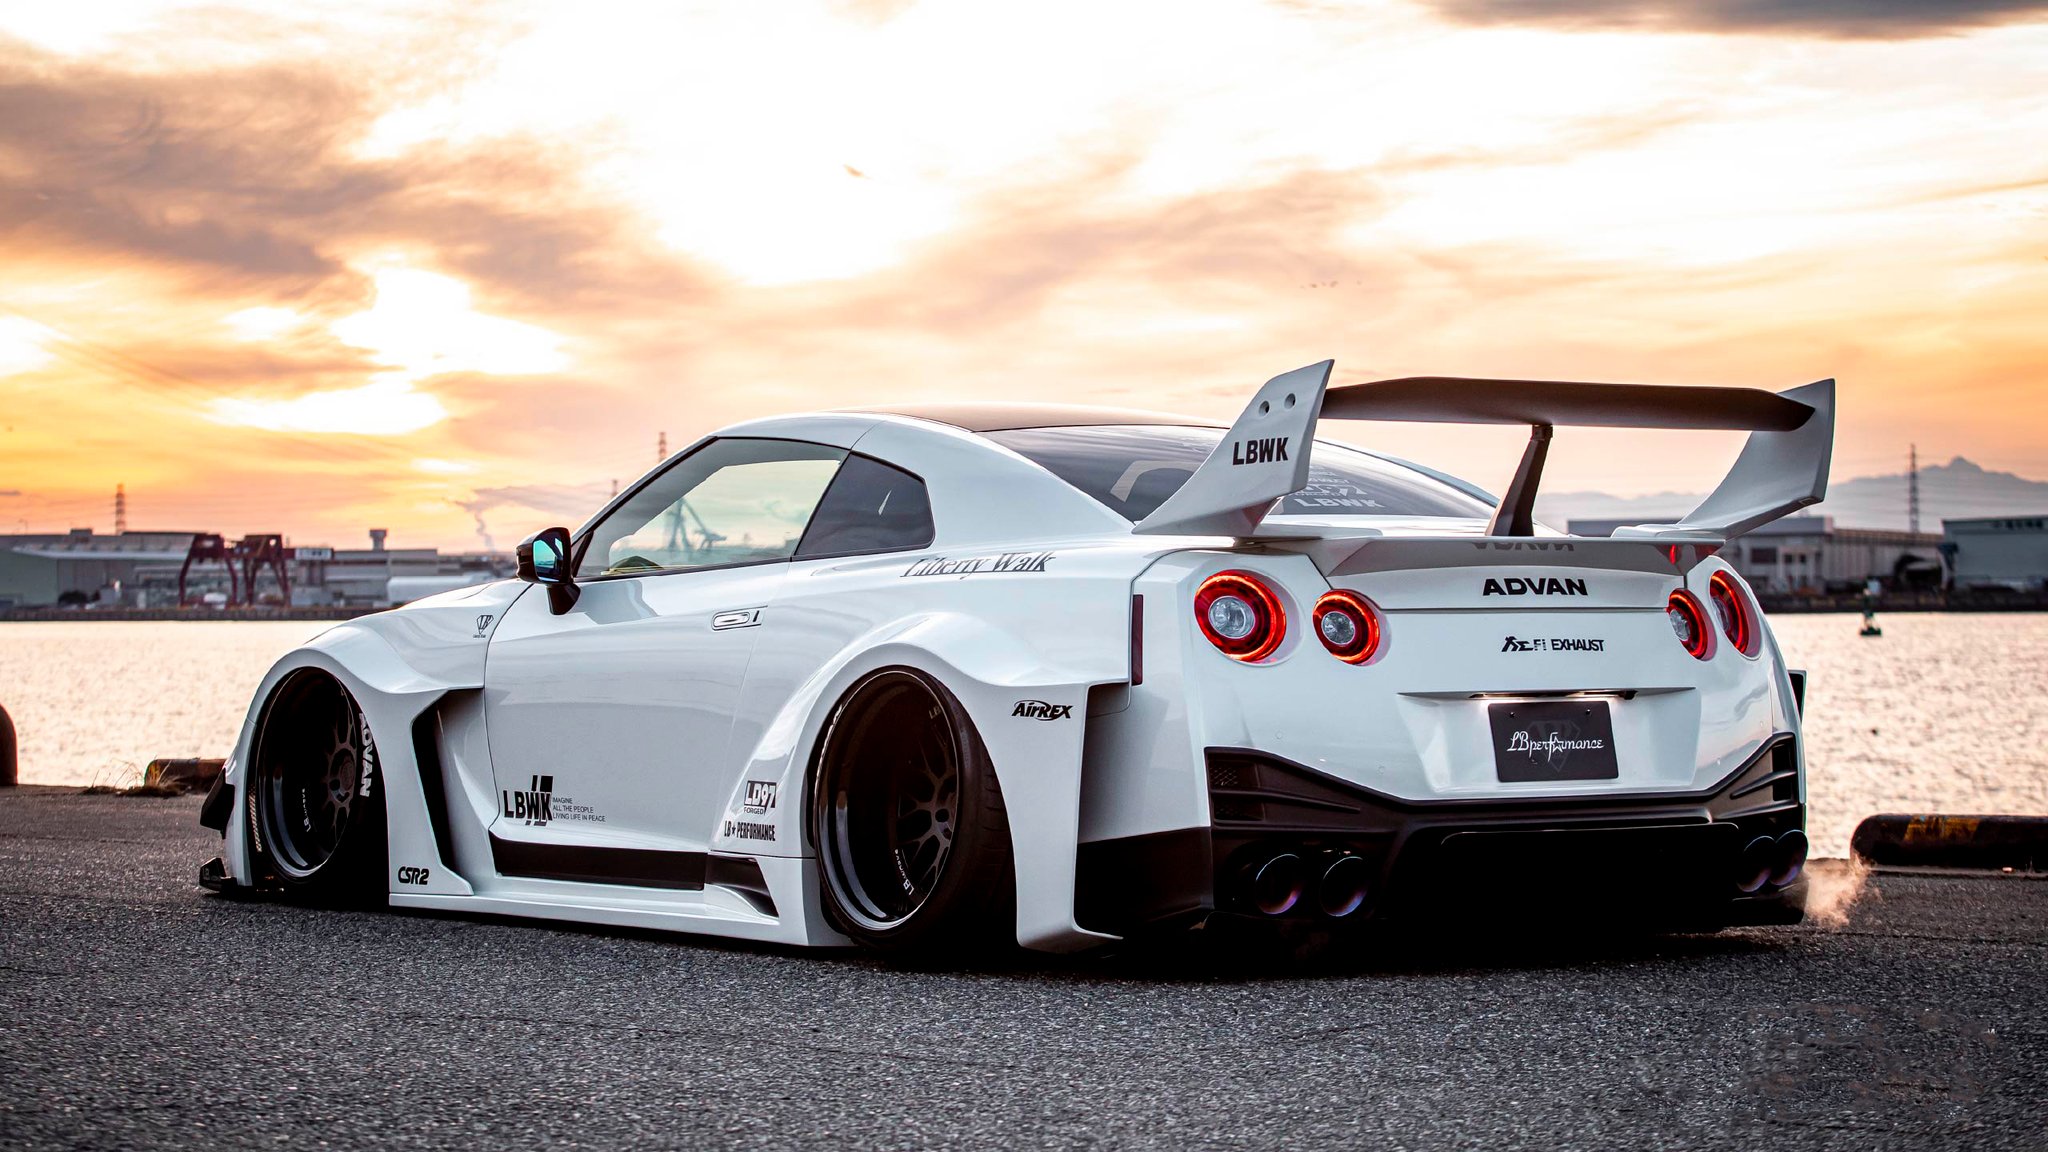 Liberty Walk Body Kit For Nissan GT R R35 Buy With Delivery, Installation, Affordable Price And Guarantee